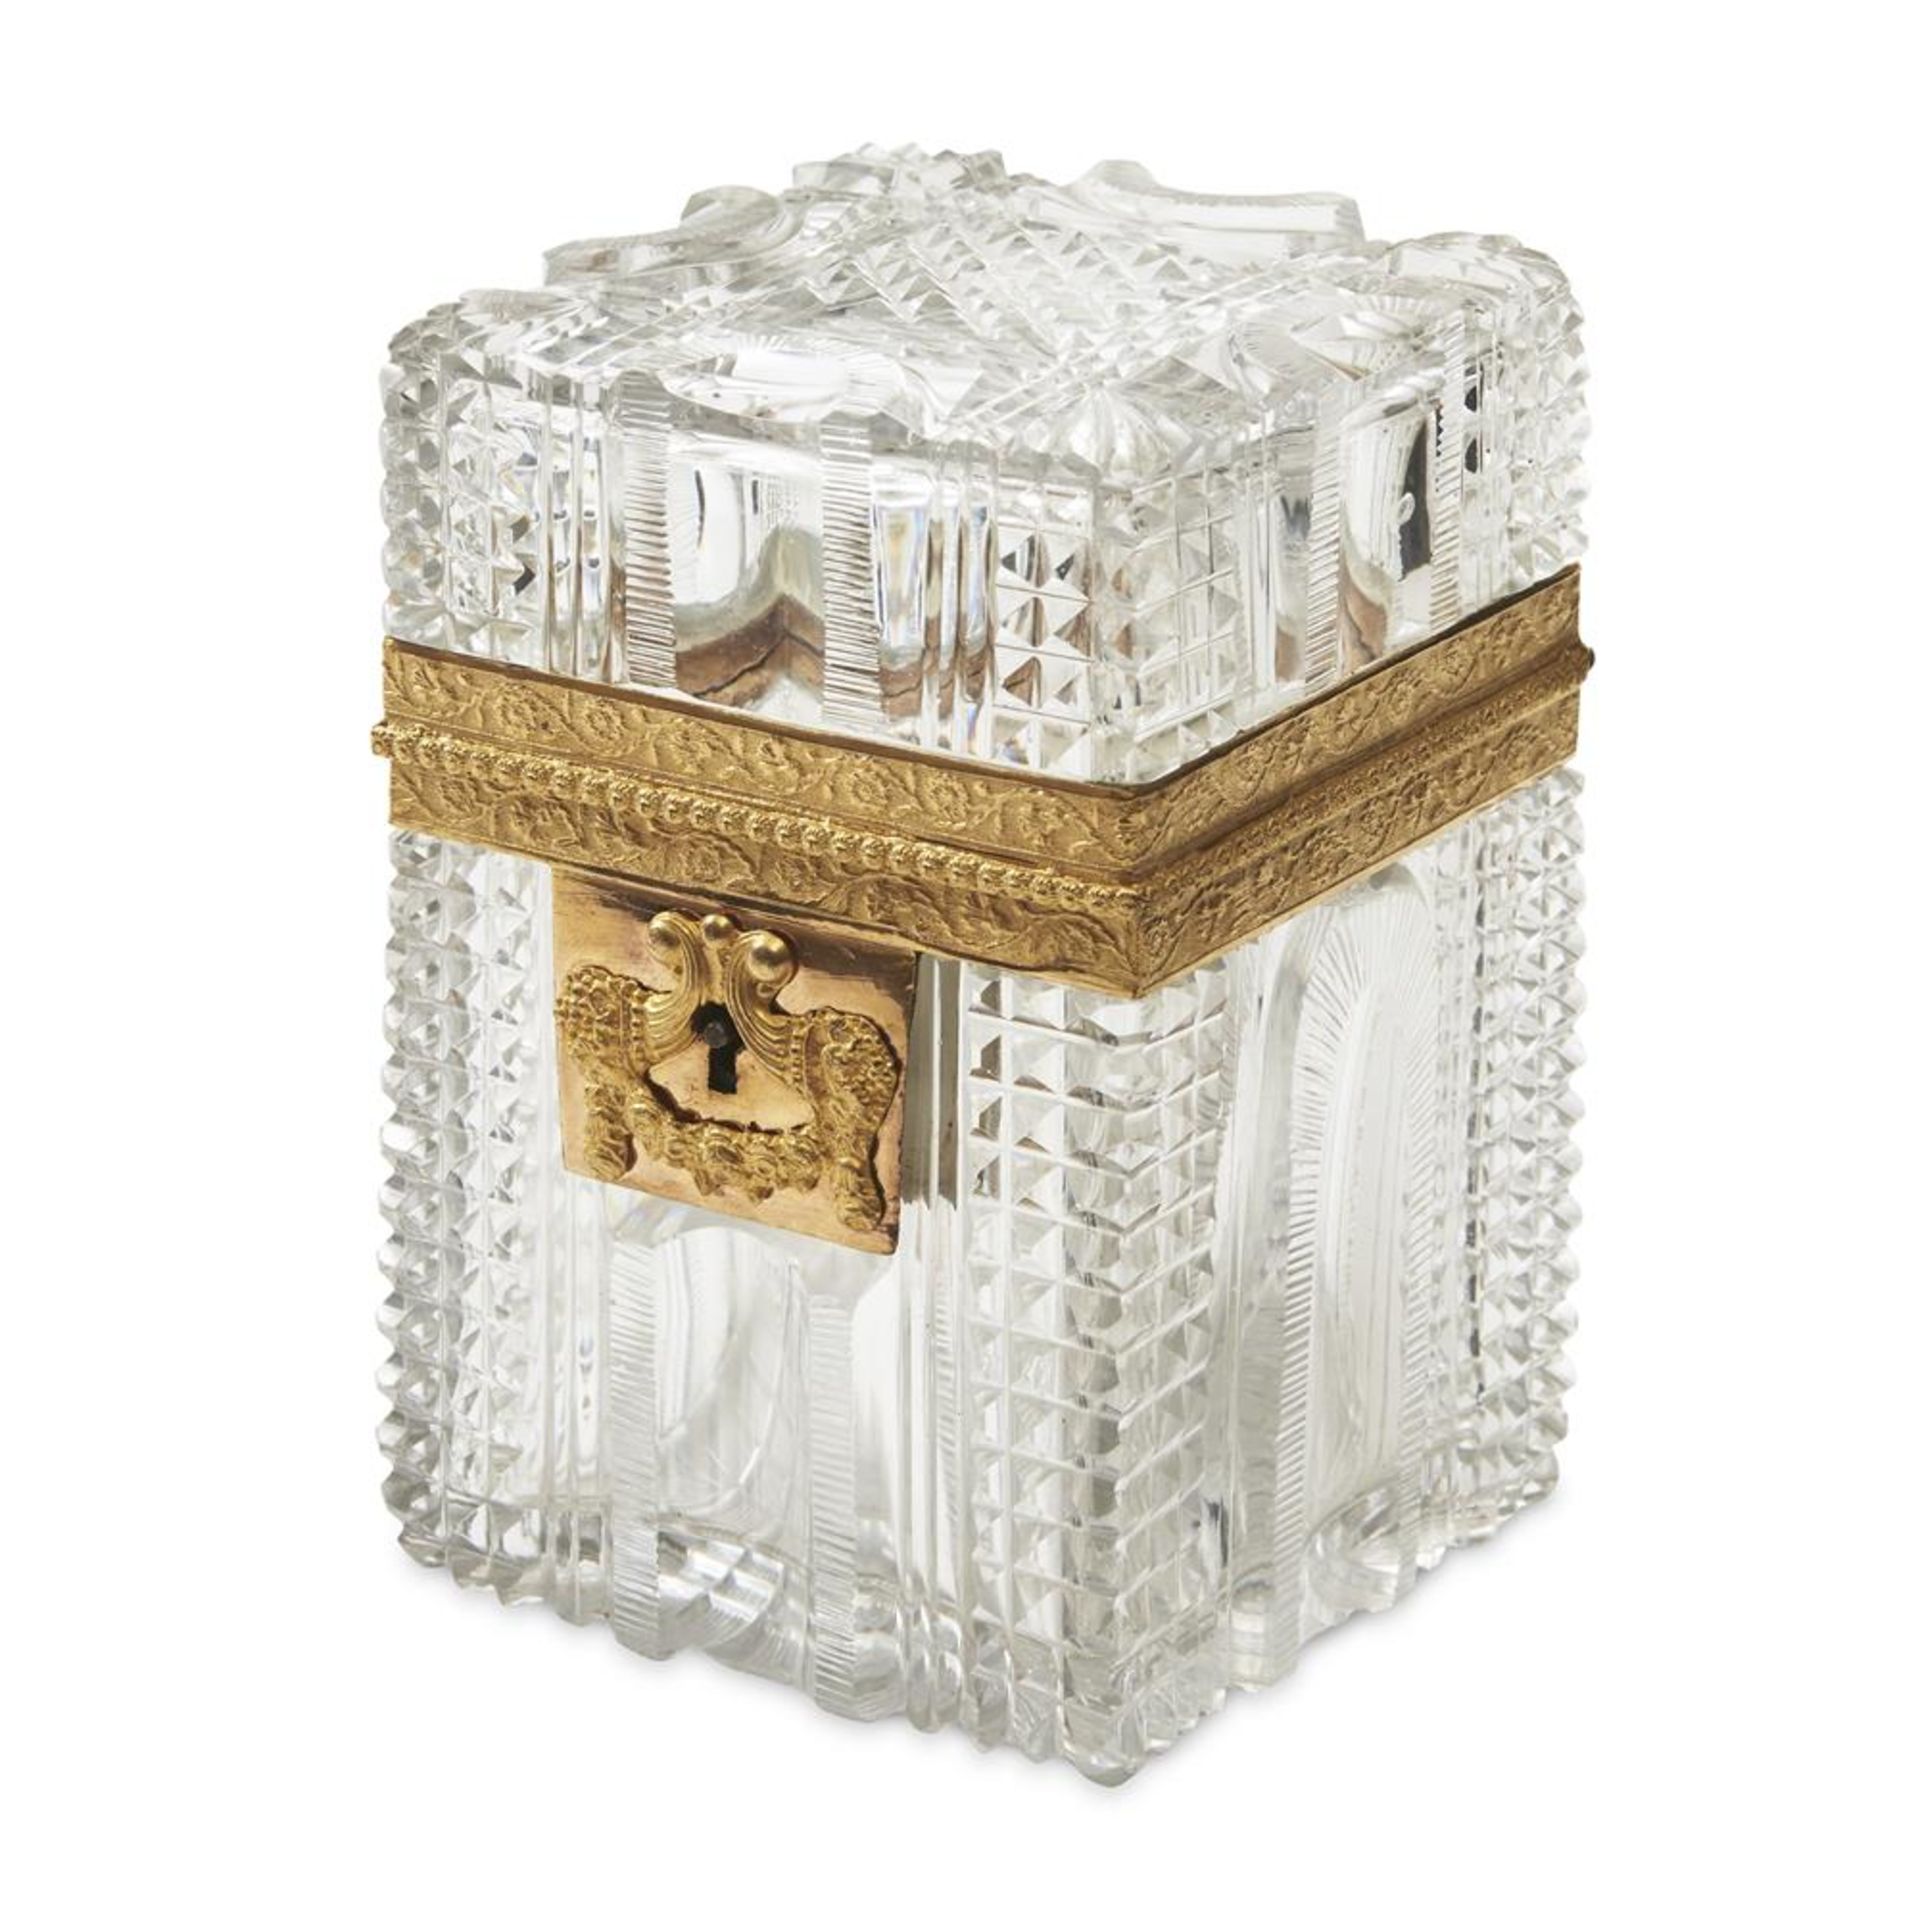 A CHARLES X/LOUIS PHILIPPE CUT GLASS AND GILT METAL MOUNTED BOX AND HINGED COVER